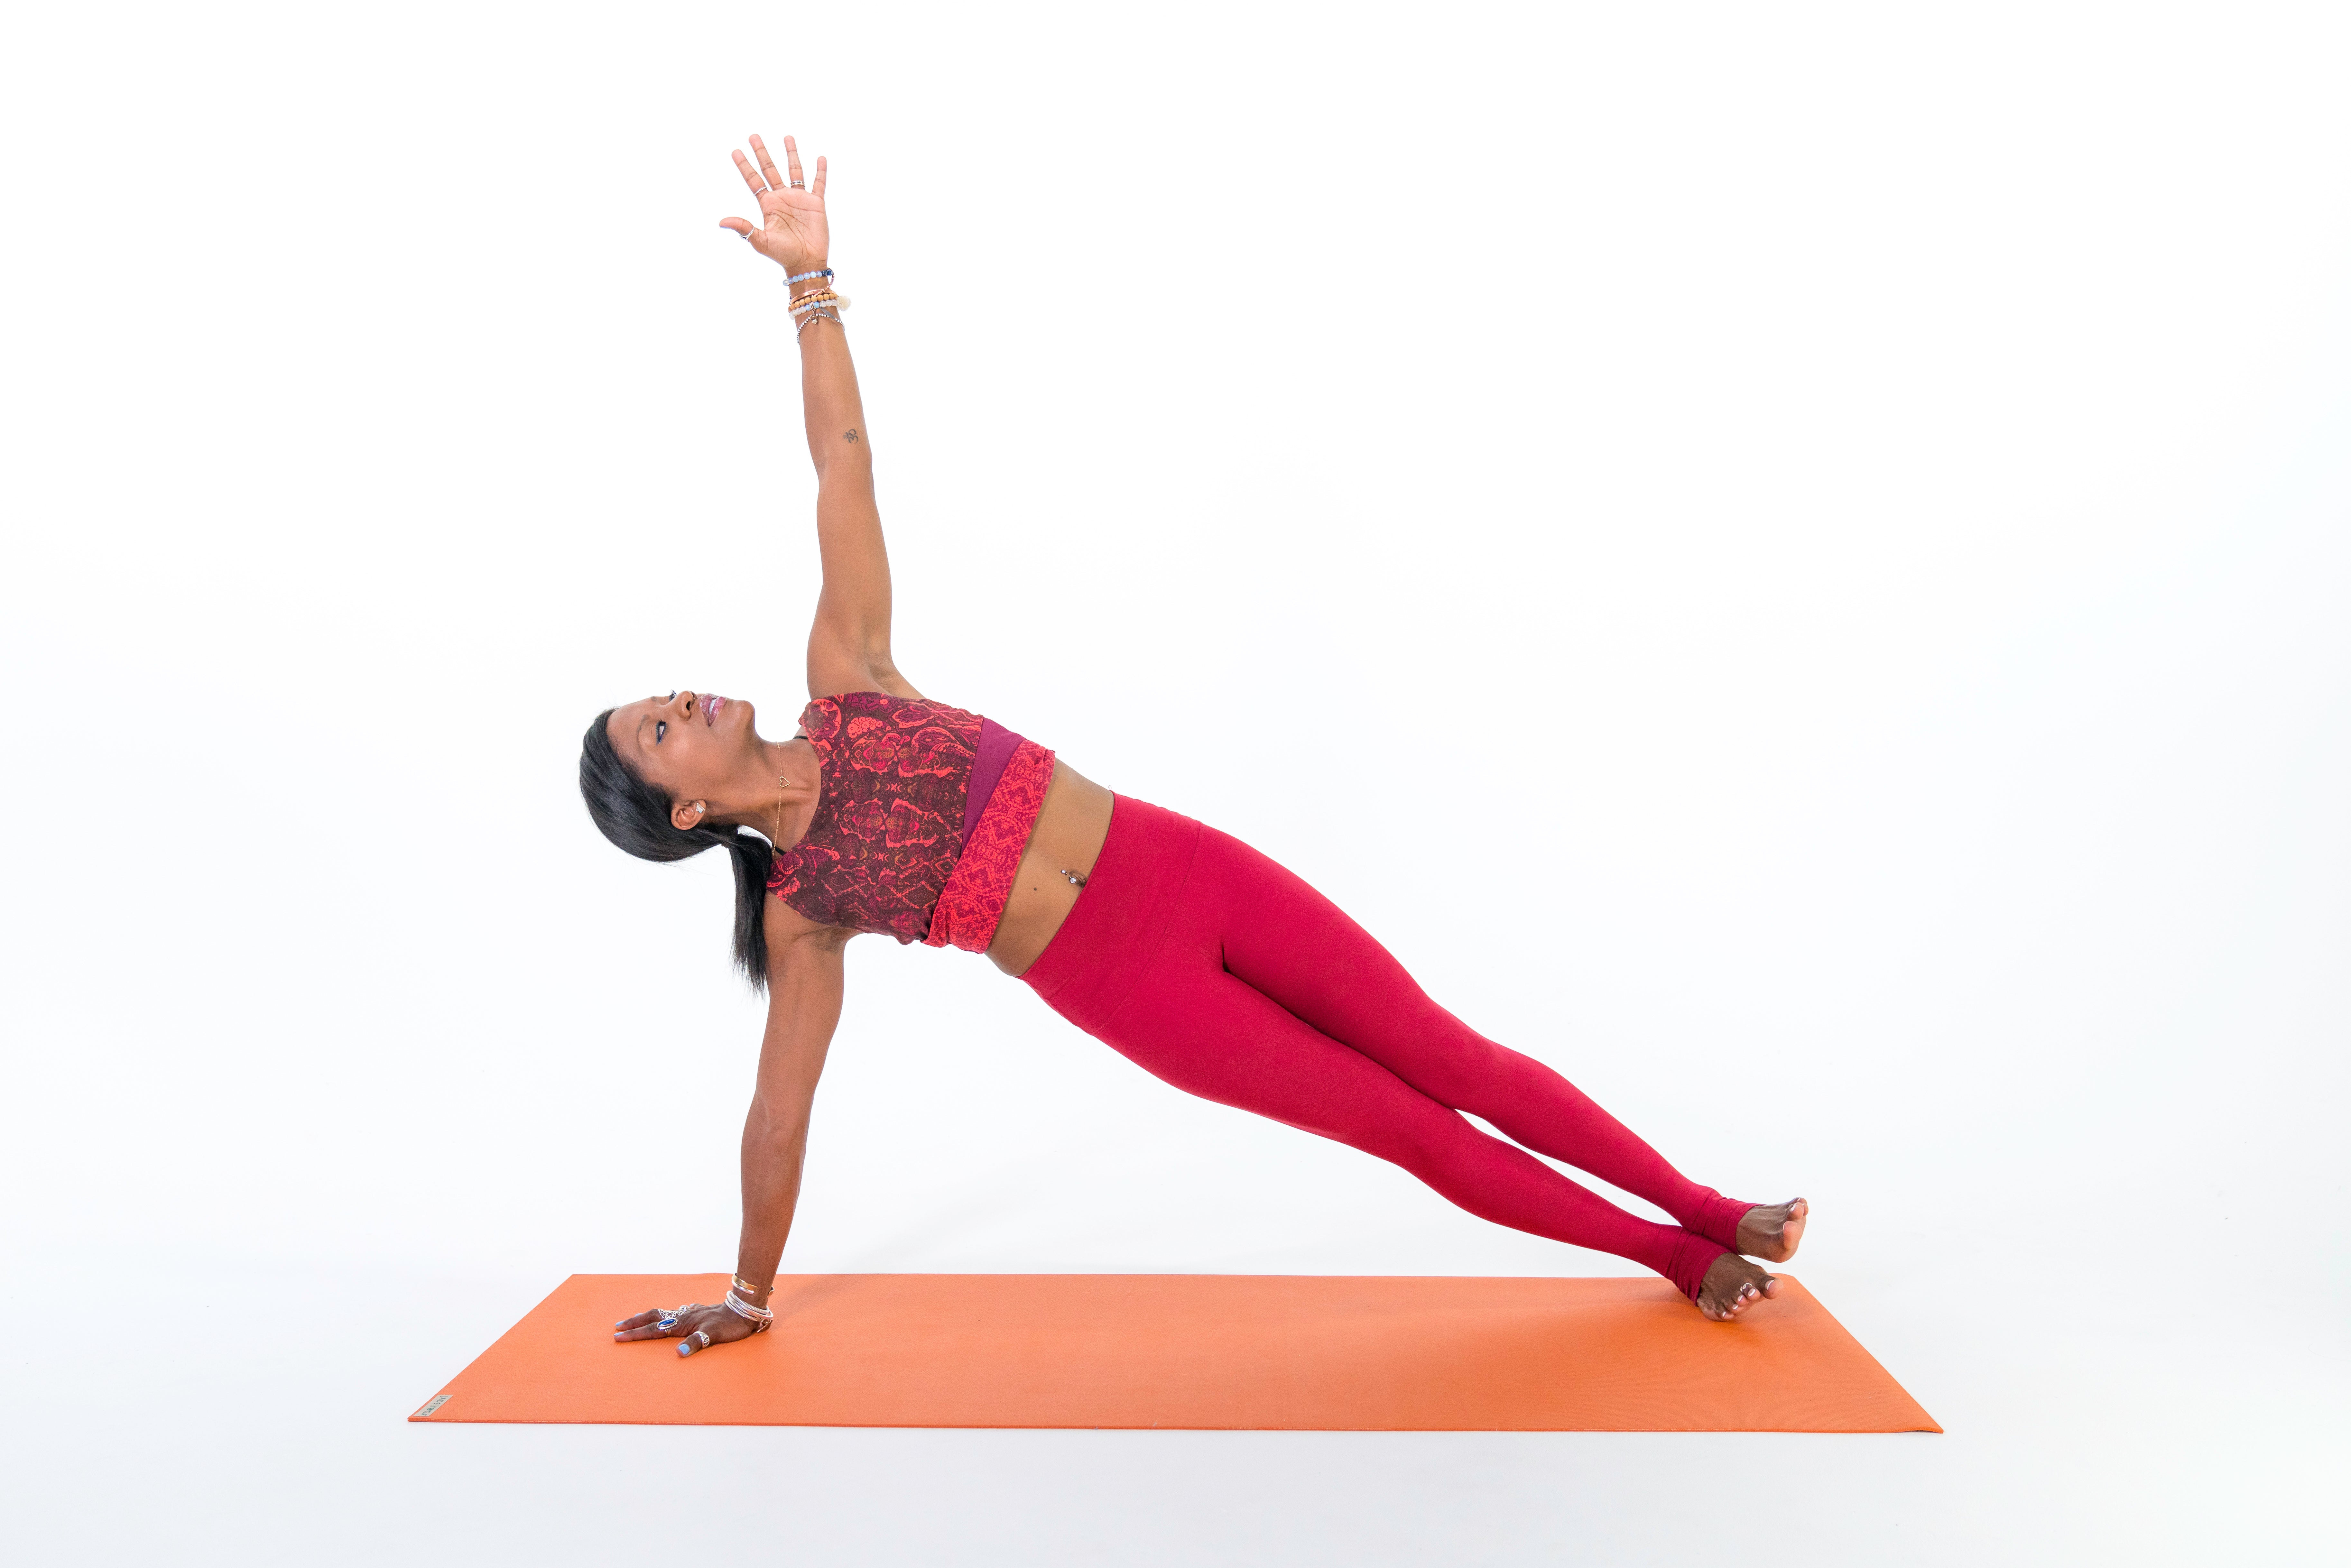 Yoga Poses to Improve your Movement, Body, Breathing and Wellbeing | BOXROX